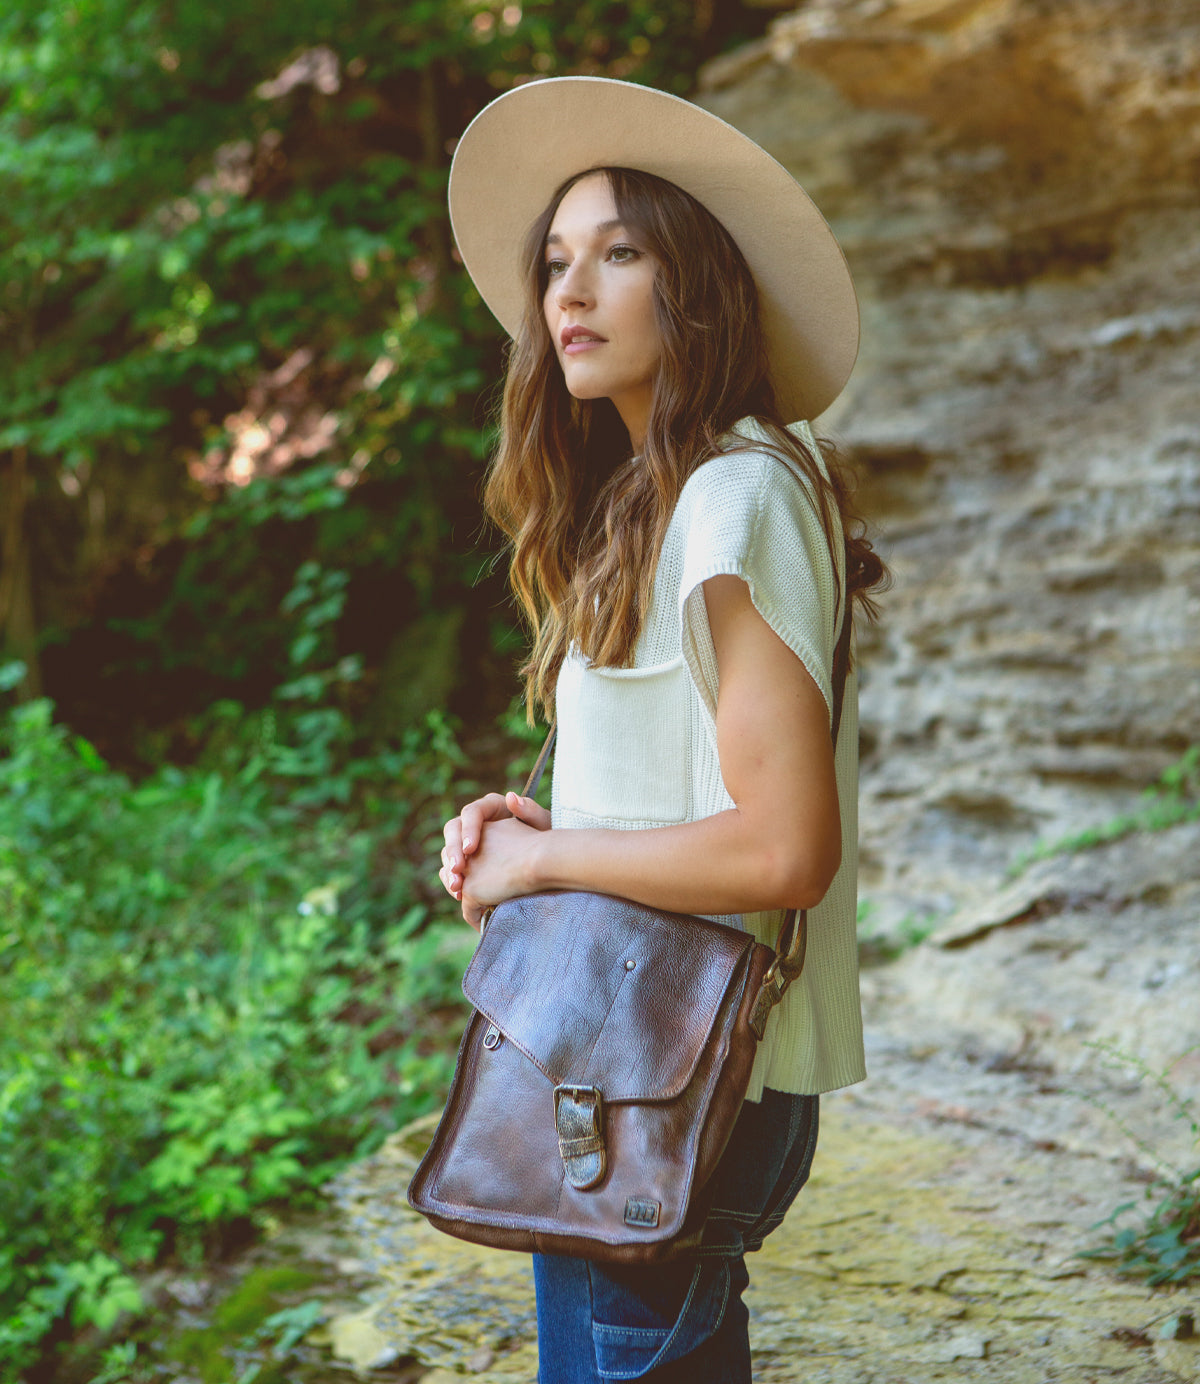 A woman wearing a hat and a Venice Beach teak leather bag by Bed Stu.